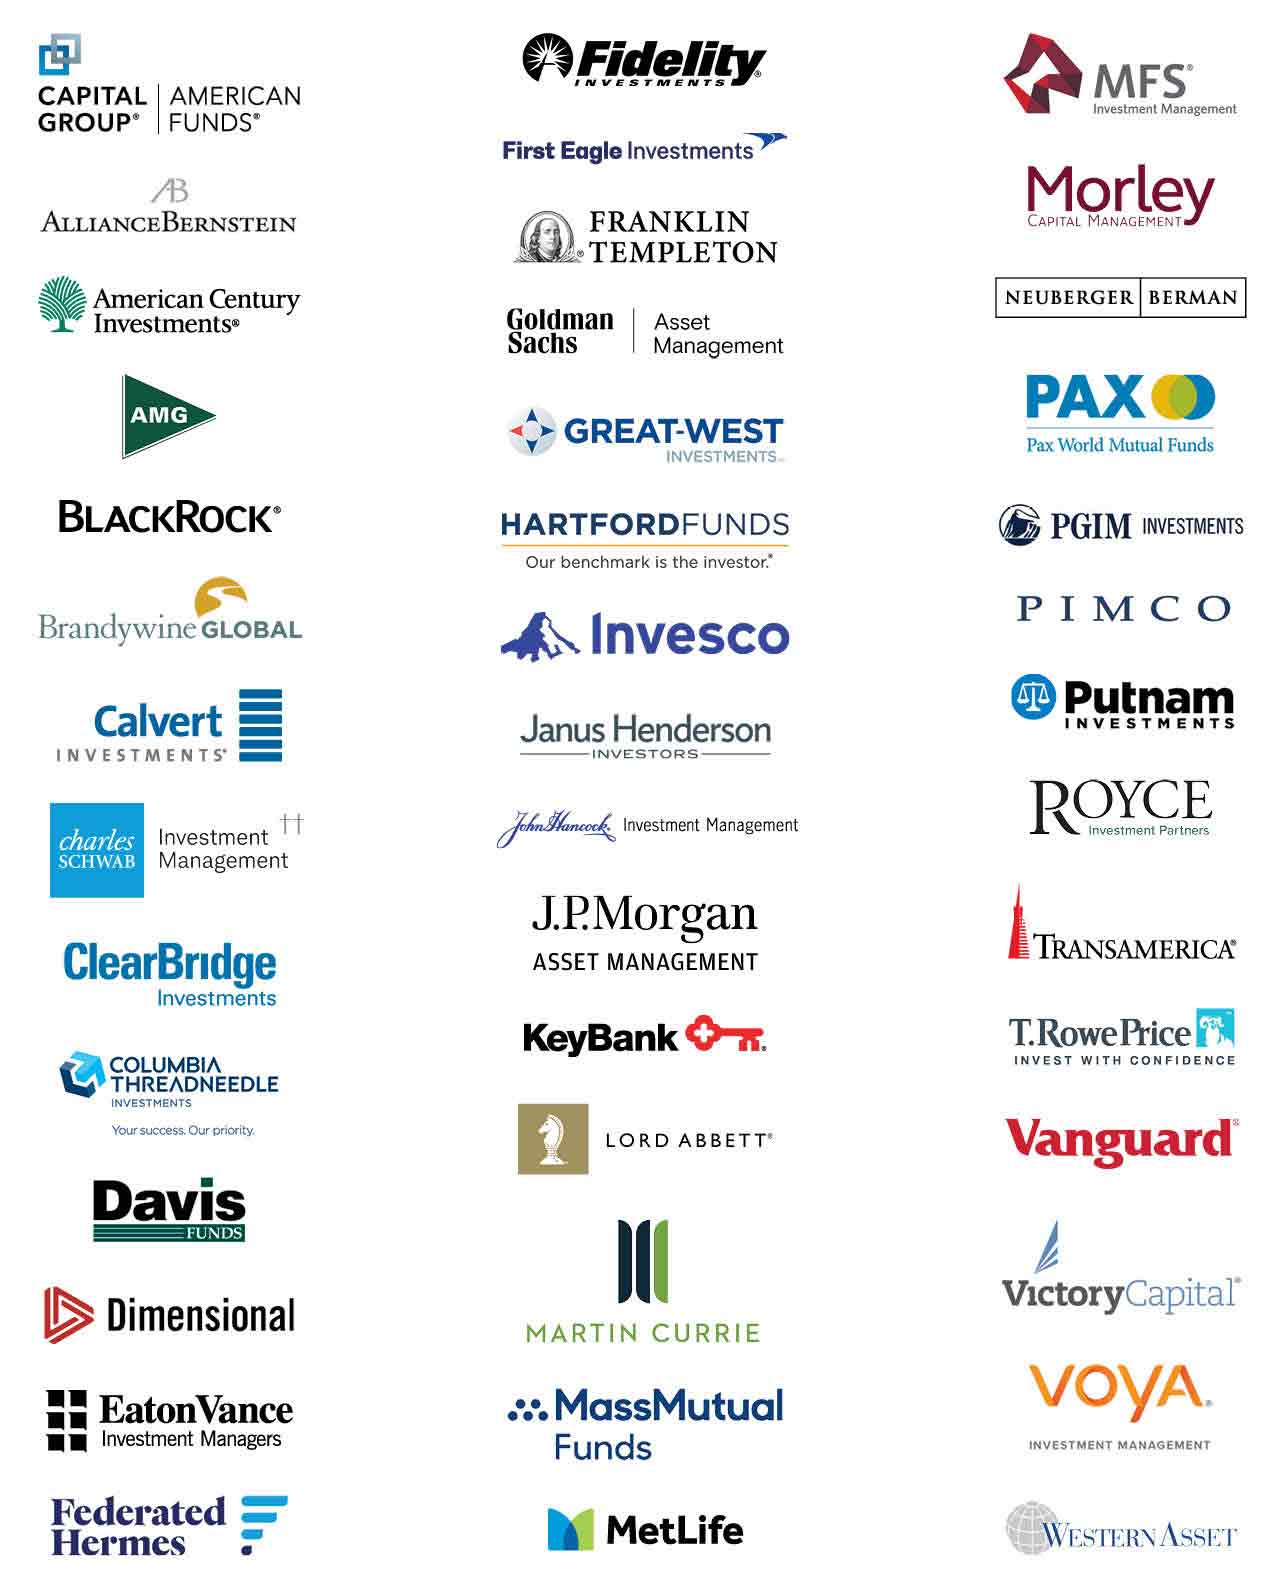 Image shows the company logos for the funds from well-respected investment managers. The company logos include: Capital Group/American Funds, AllianceBernstein, American Century Investments, AMG Funds, BlackRock, Brandywine Global, Calvert Investments, Charles Schwab Investment Management, ClearBridge Investments, Columbia Threadneedle, Davis Funds, Dimensional, Eaton Vance Investment Managers, Federated Hermes, Fidelity, First Eagle, Franklin Templeton, Goldman Sachs Asset Management, Great-West Investments, The Hartford, Invesco, Janus Henderson Investors, John Hancock Investments, J.P. Morgan Asset Management, KeyBank, Lord Abbett, Martin Curie, MassMutual Funds, MetLife, MFS Investment Management, Morley Capital Management, Neuberger Berman, Pax World Mutual Funds, PGIM Investments, PIMCO, Putnam Investments, Royce Investment Partners, Transamerica, T. Rowe Price, Vanguard, Victory Capital, Voya Investment Management, Western Asset